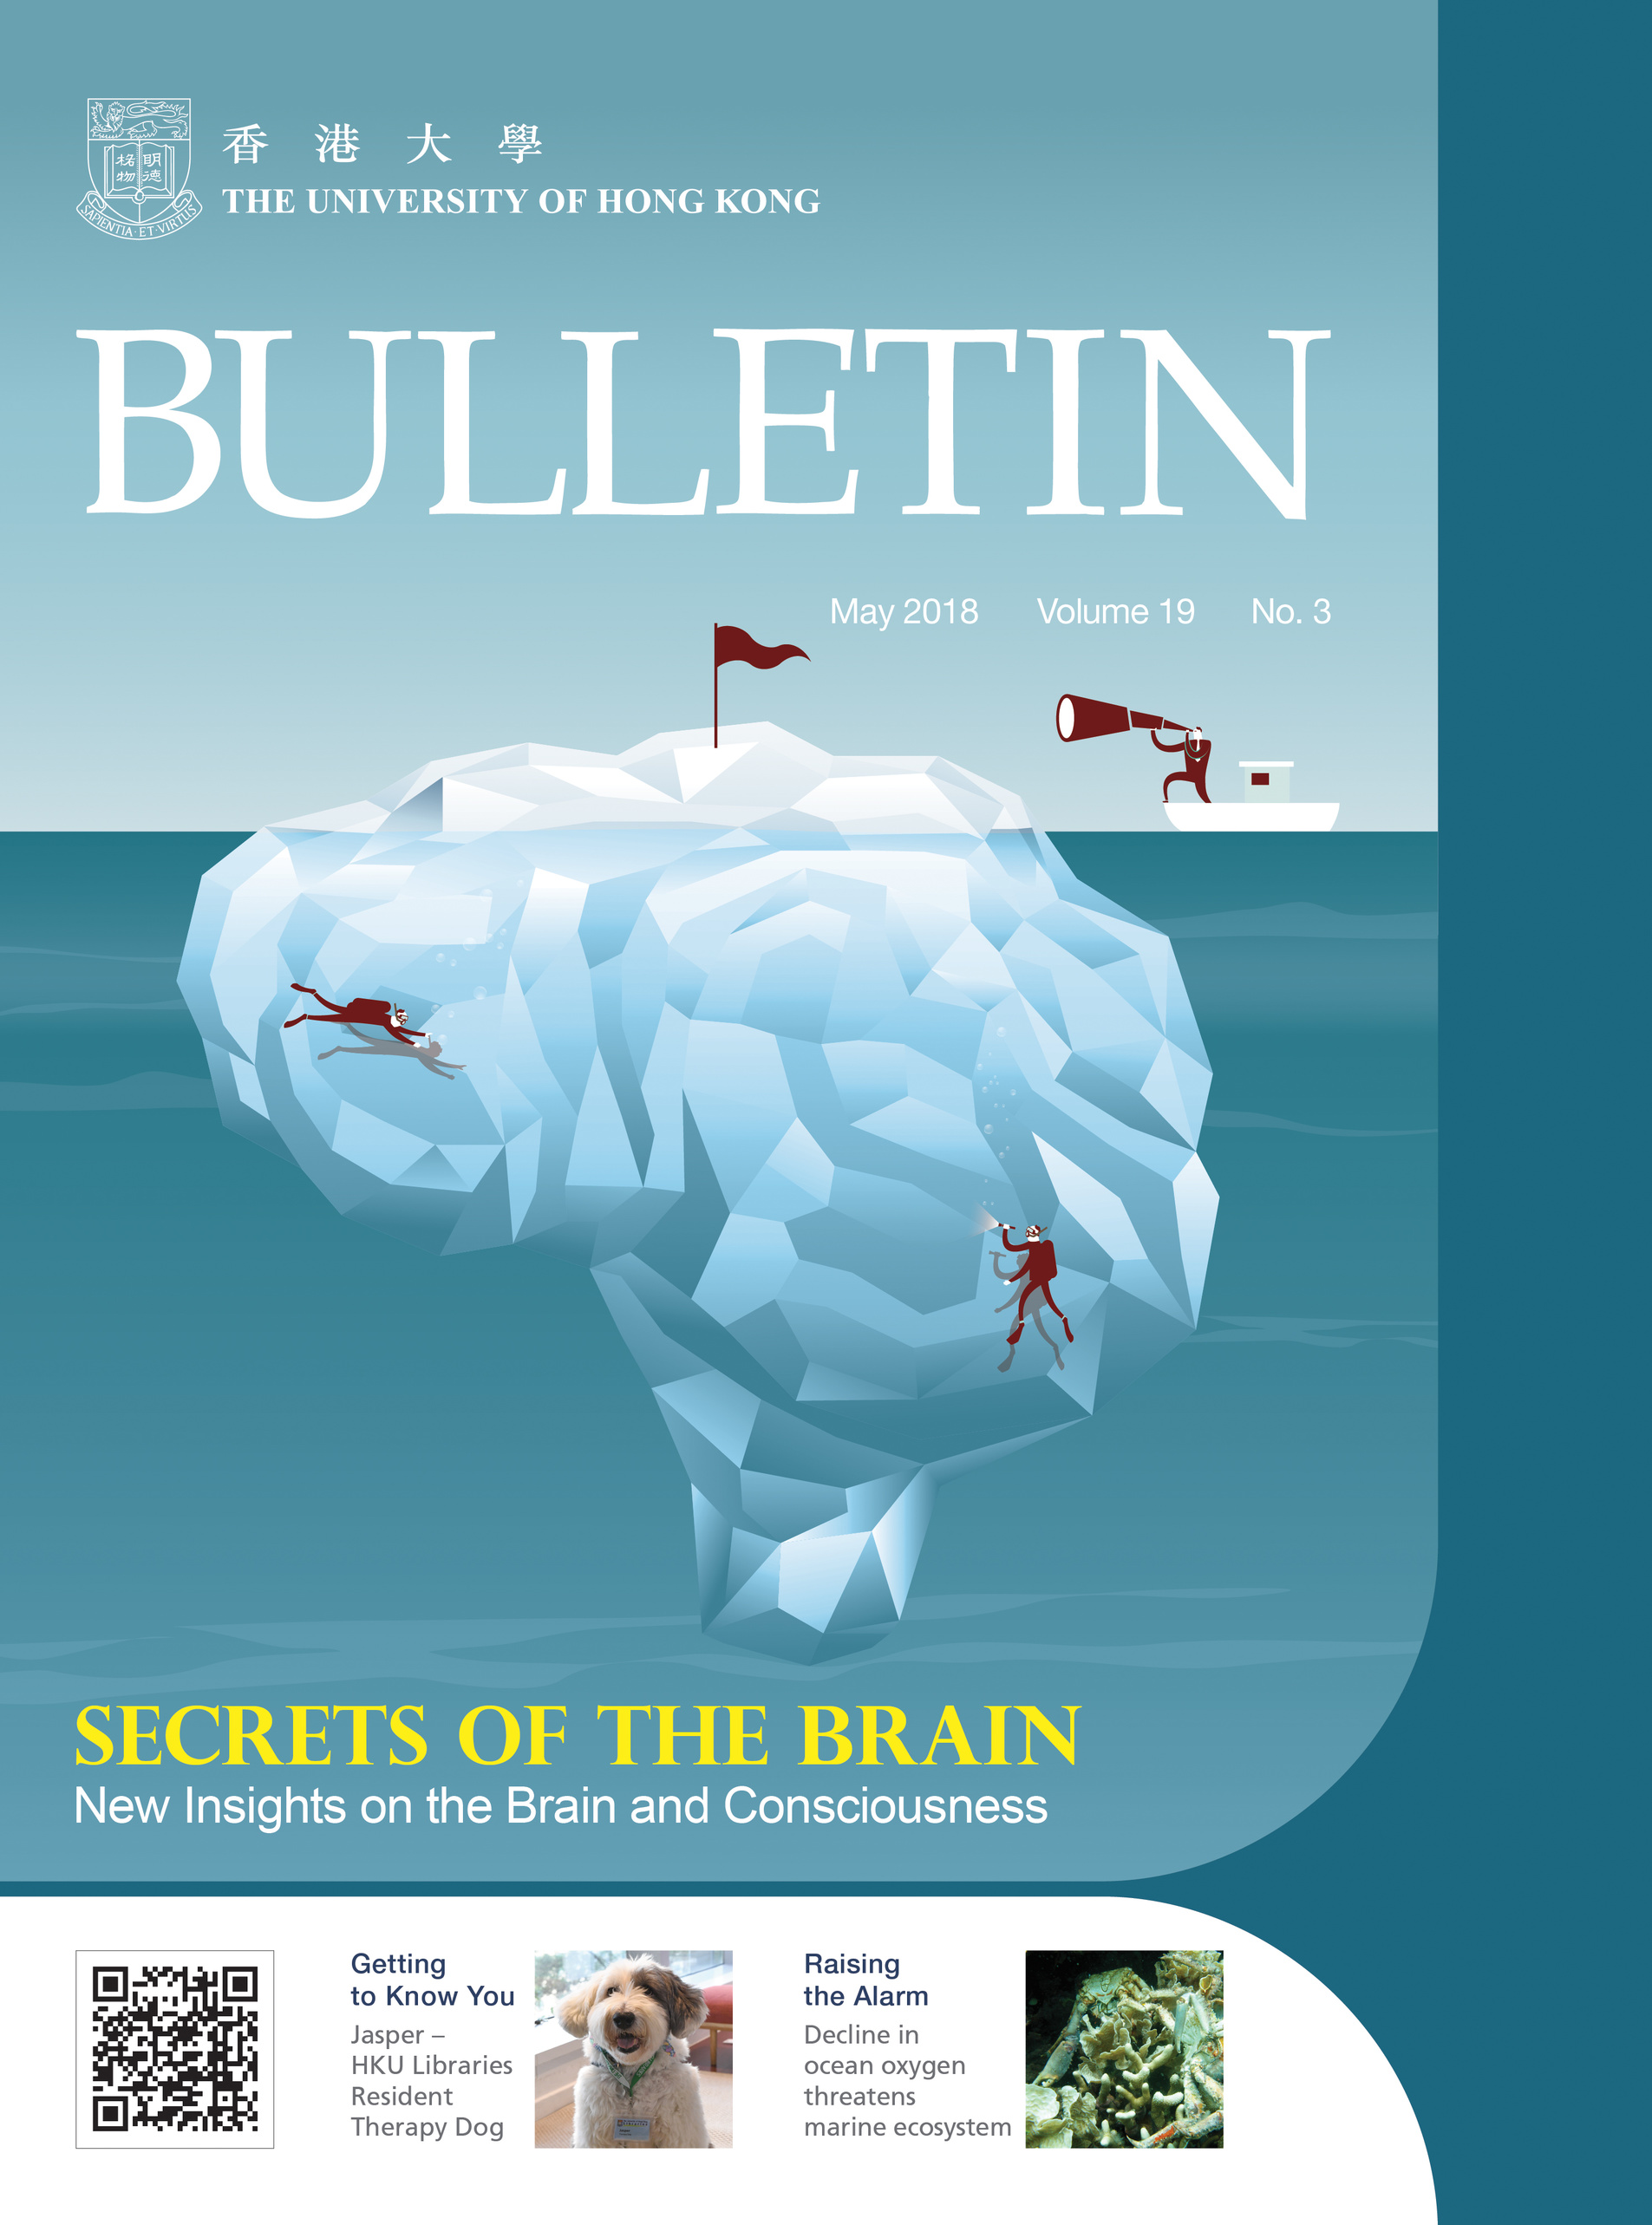 Bulletin May 2018 issue is out